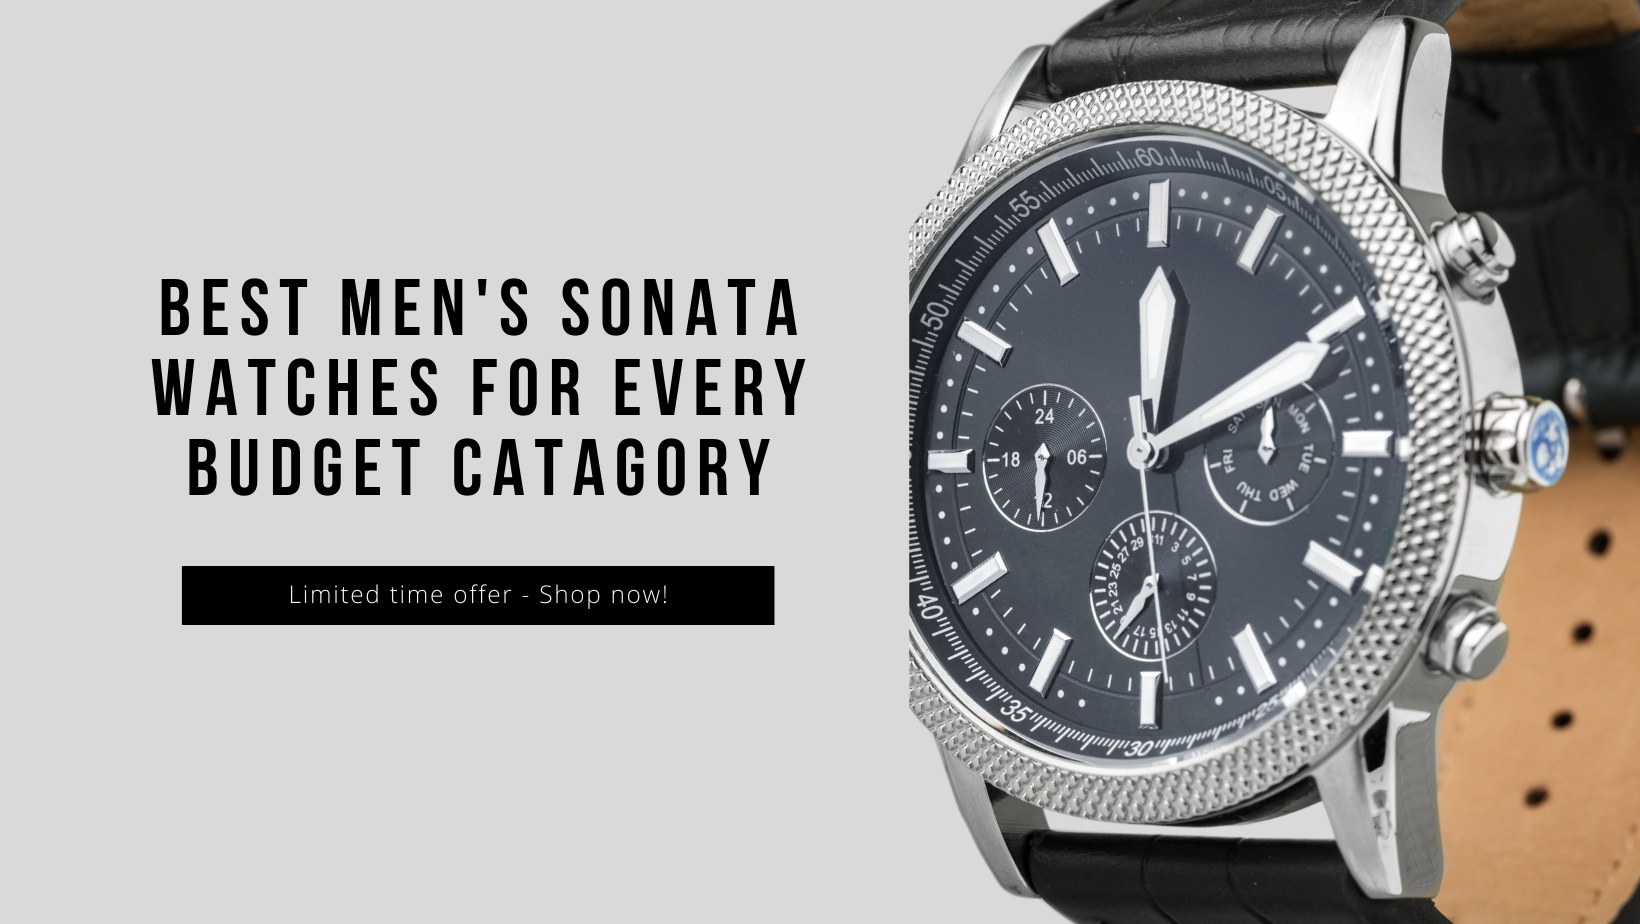 Best Men's Sonata Watches for Every Budget Category